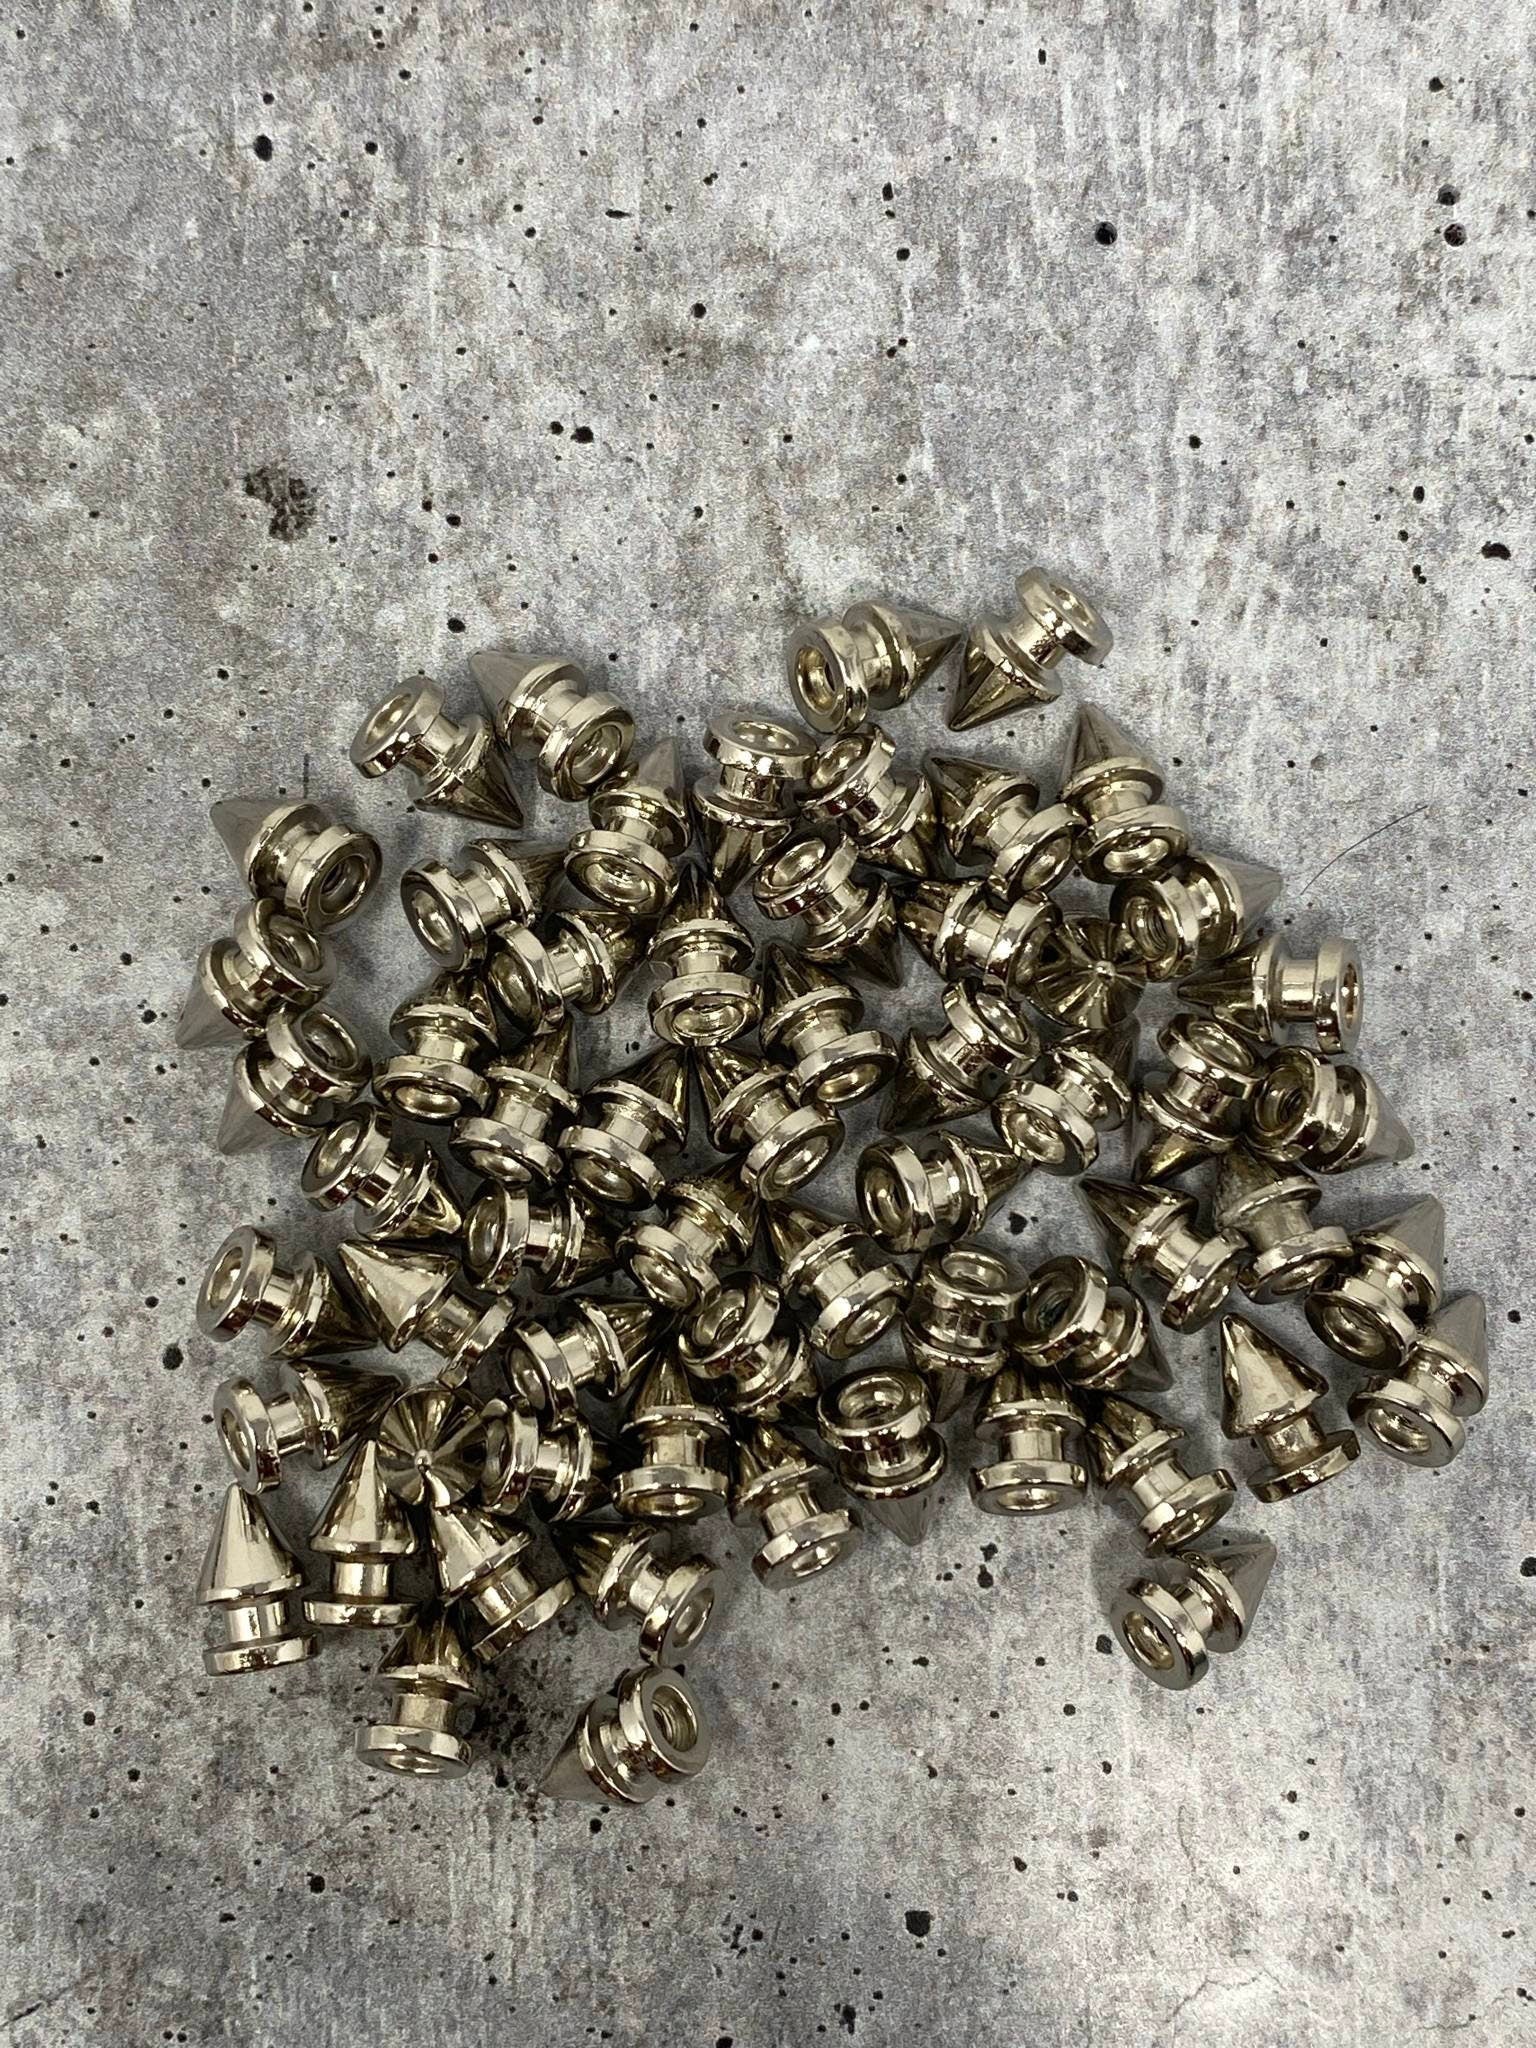 New,Gold Spikes, 12mm, 100-pcs, Spikes w/Screws, Small Cone Spikes & –  PatchPartyClub